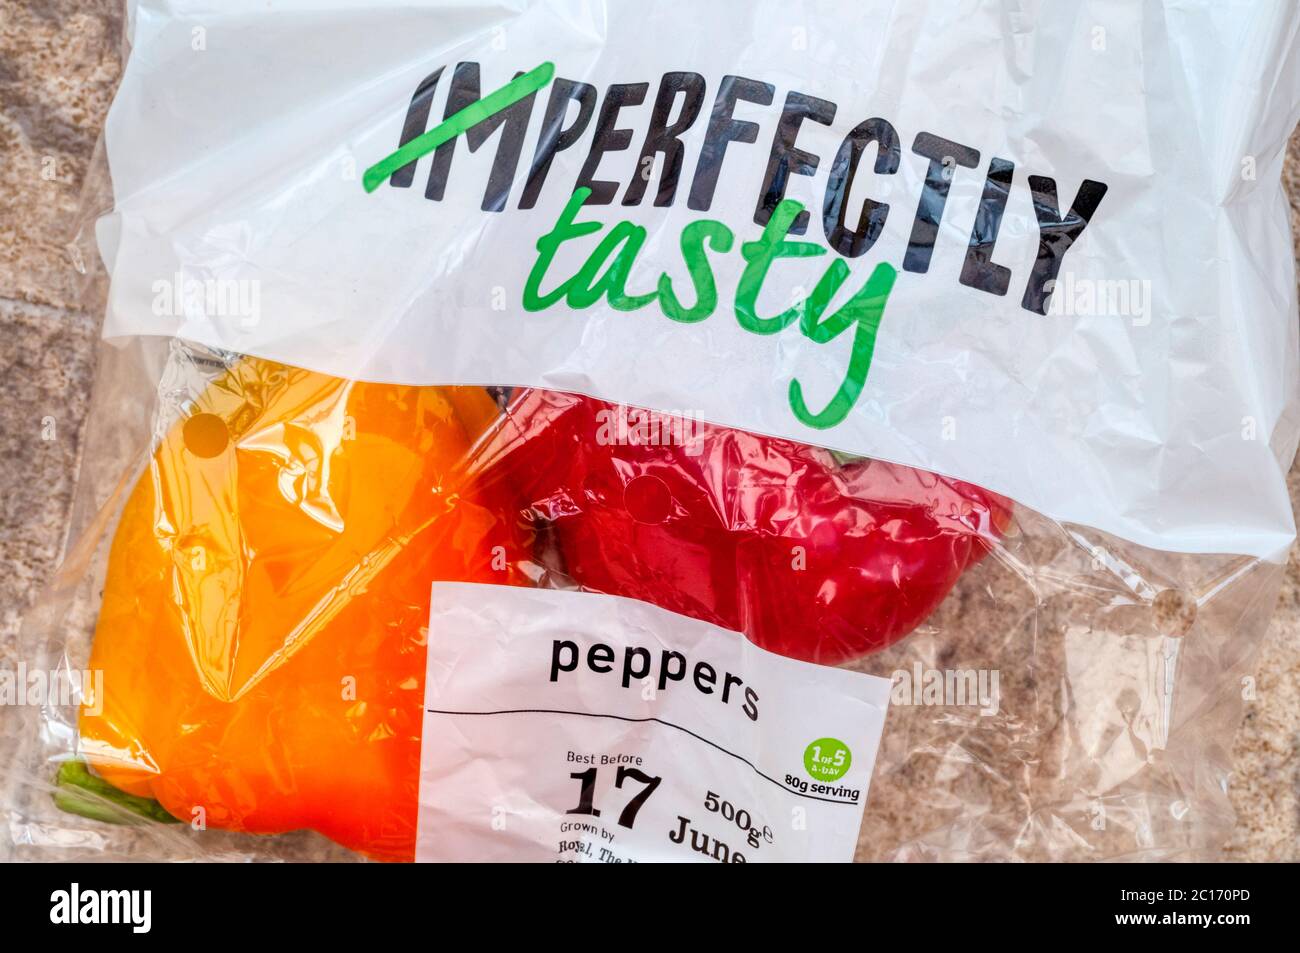 A bag of Sainsbury's Imperfectly Tasty red and yellow peppers. Stock Photo